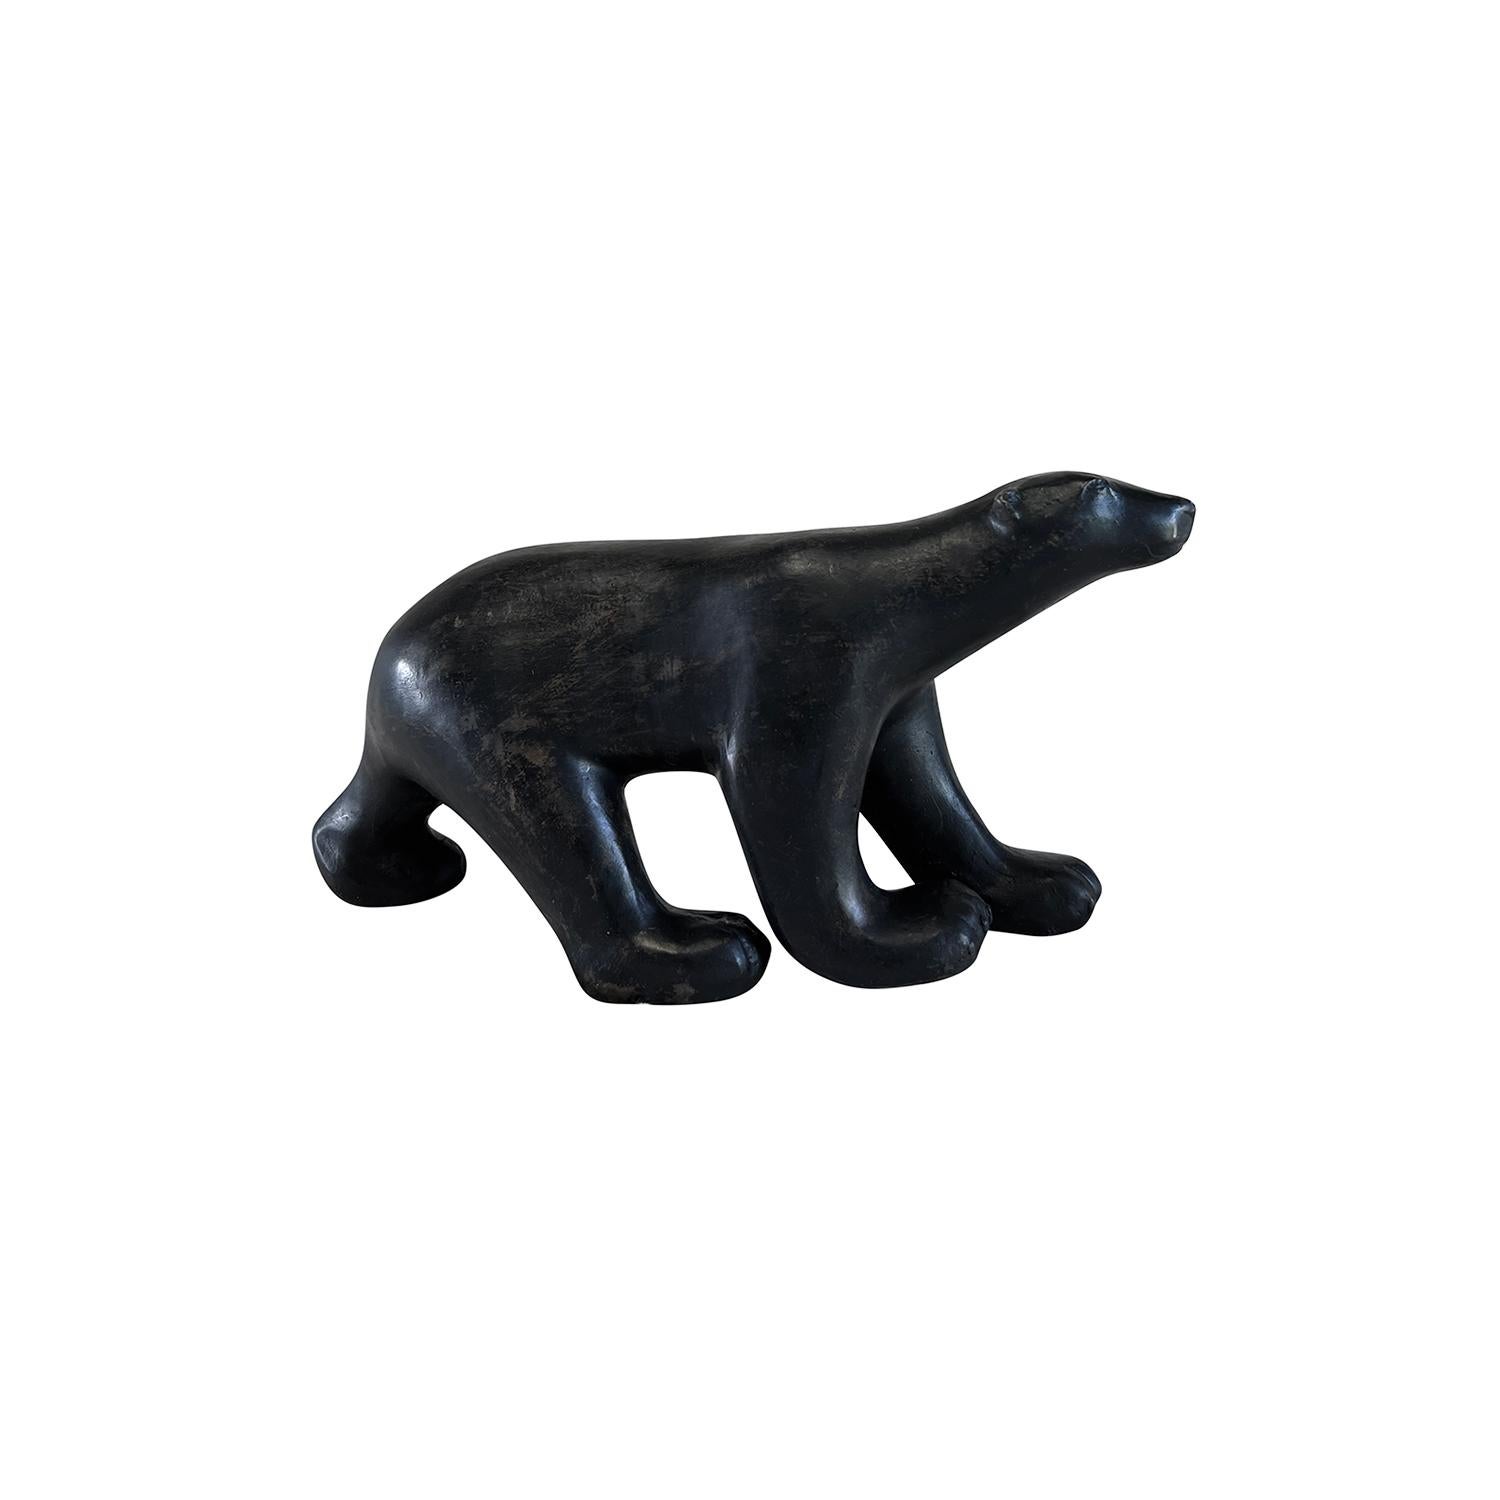 A vintage Art Deco Style French polar bear sculpture made of hand crafted patinated bronze, designed and produced by Pierre Chenet in good condition. The detailed décor piece is very similar to the bear from Francois Pompon which is located at the